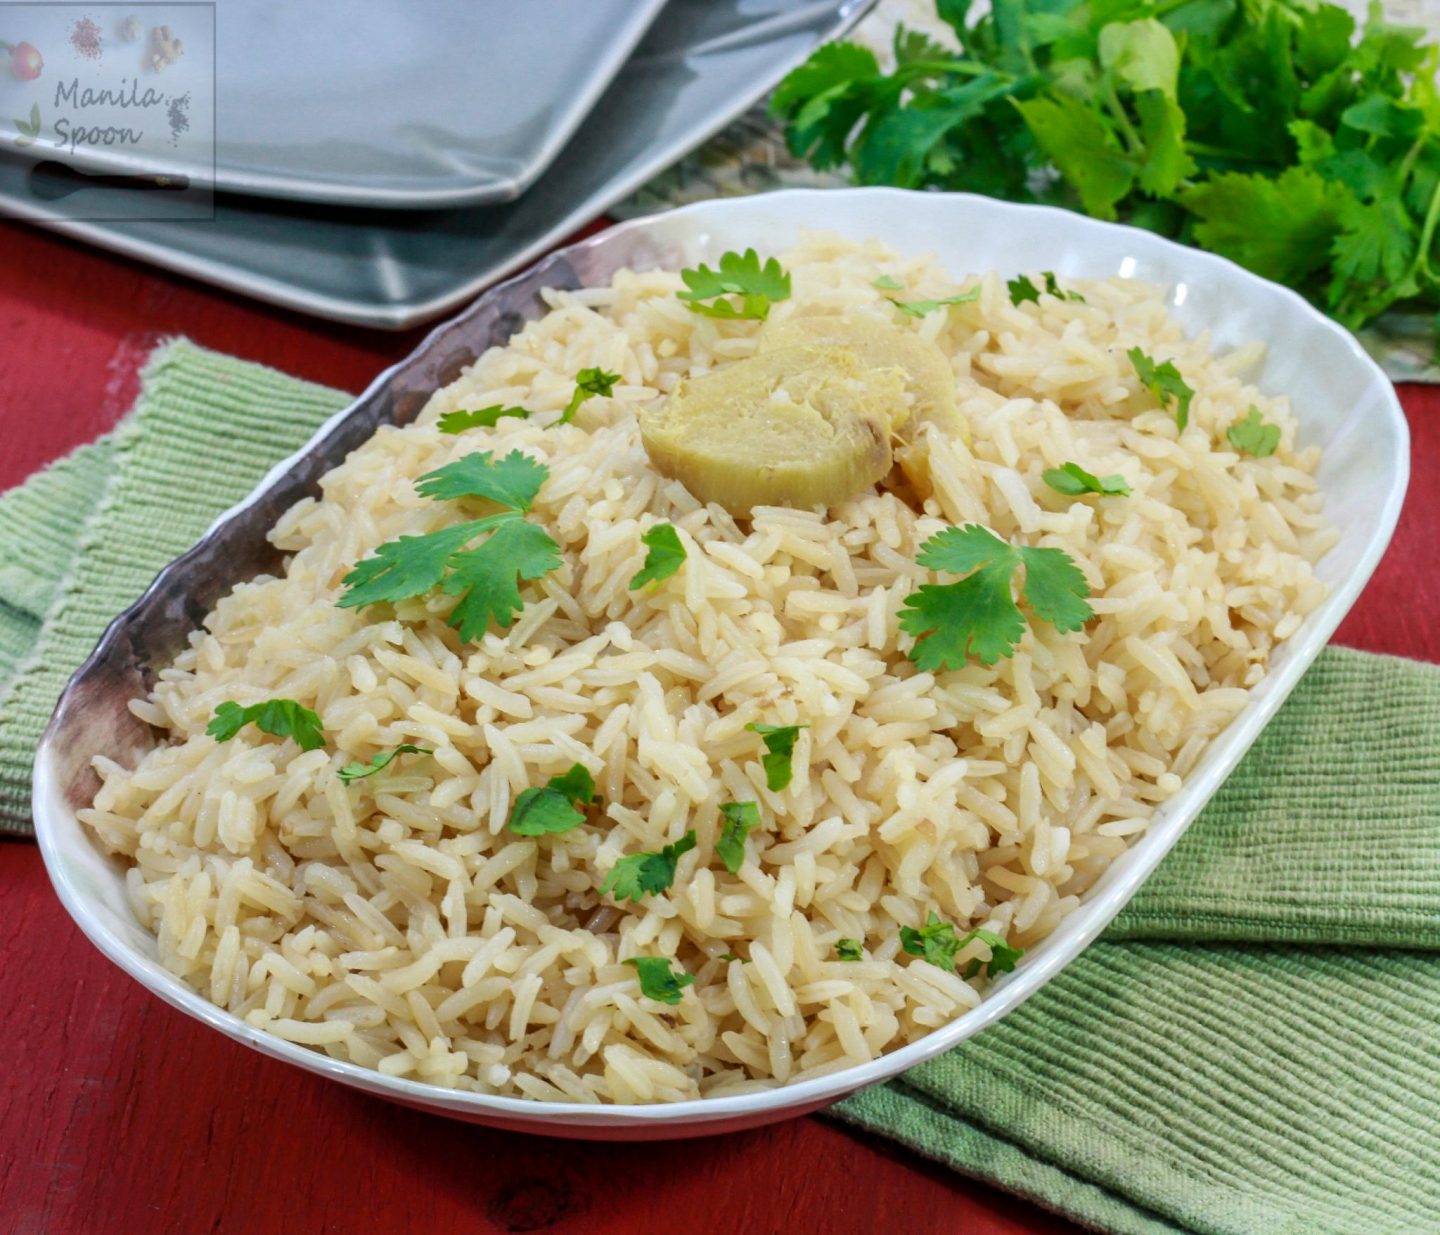  Flavored with garlic and ginger and cooked in chicken broth this easy rice dish is not only tasty it would complement any main dish that calls for rice. Can be made in the stove top or rice cooker for ease and convenience. #rice #garlicrice #gingerrice #comgungtuong 